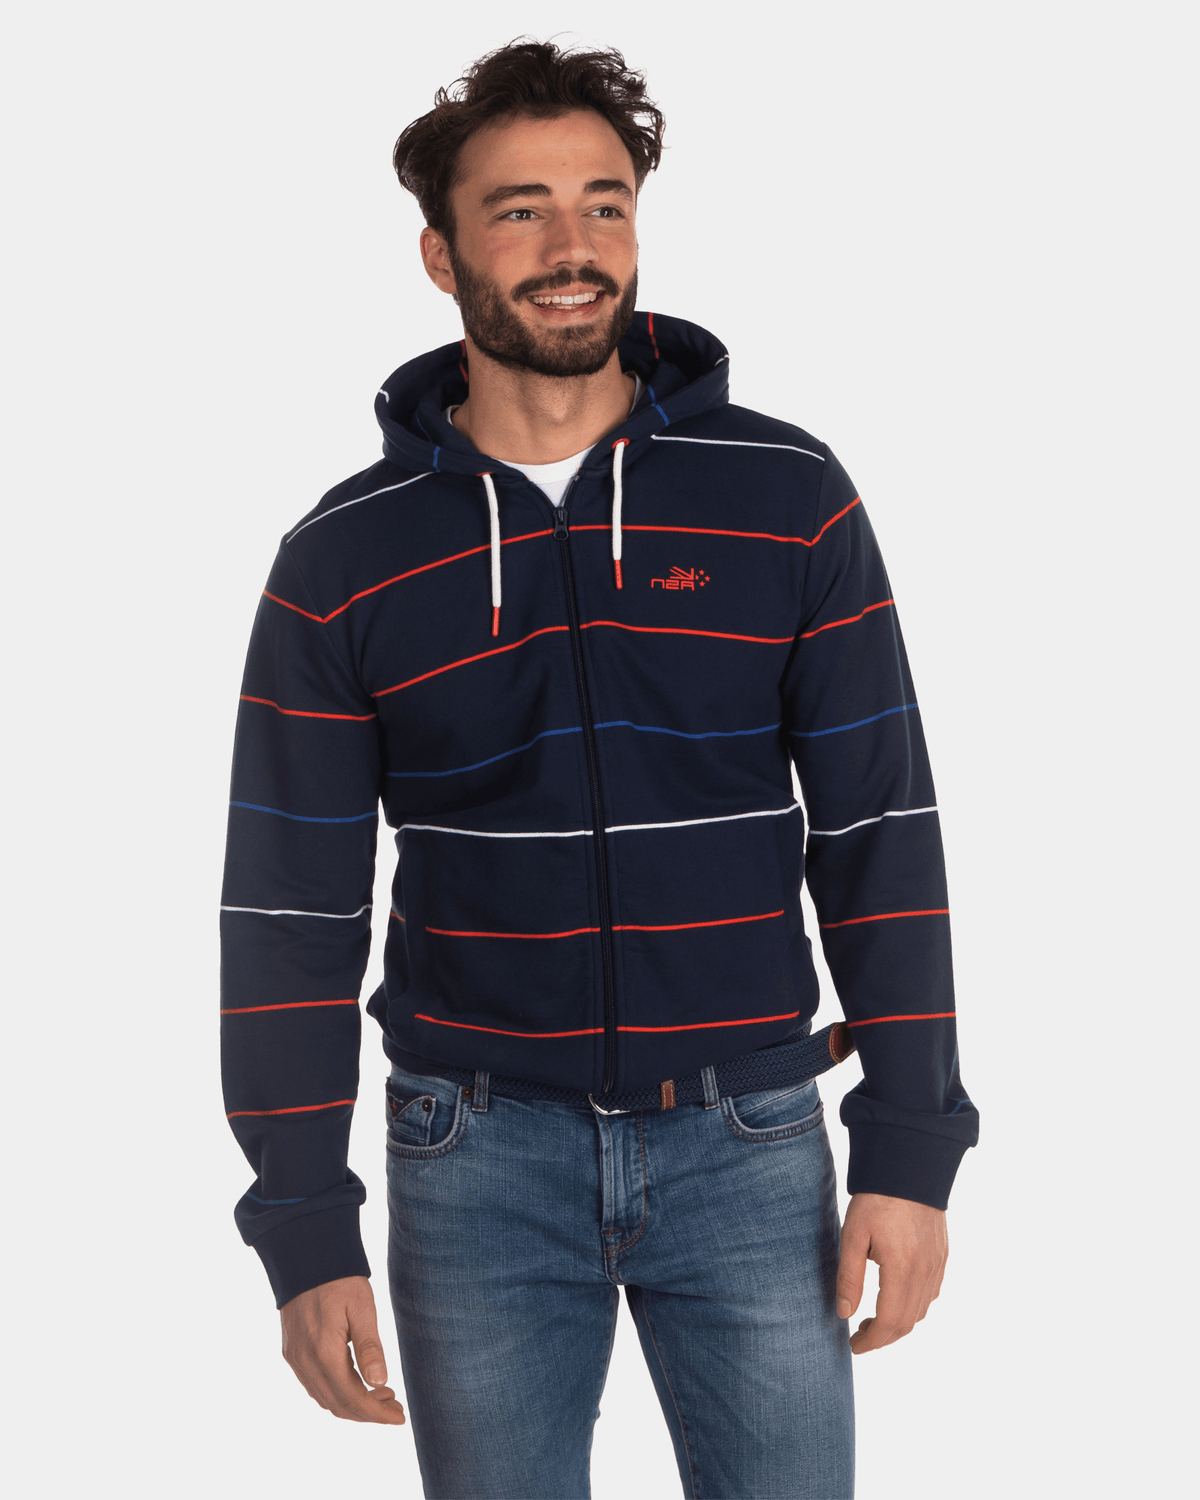 Striped cardigan blue red white - Industrial Navy